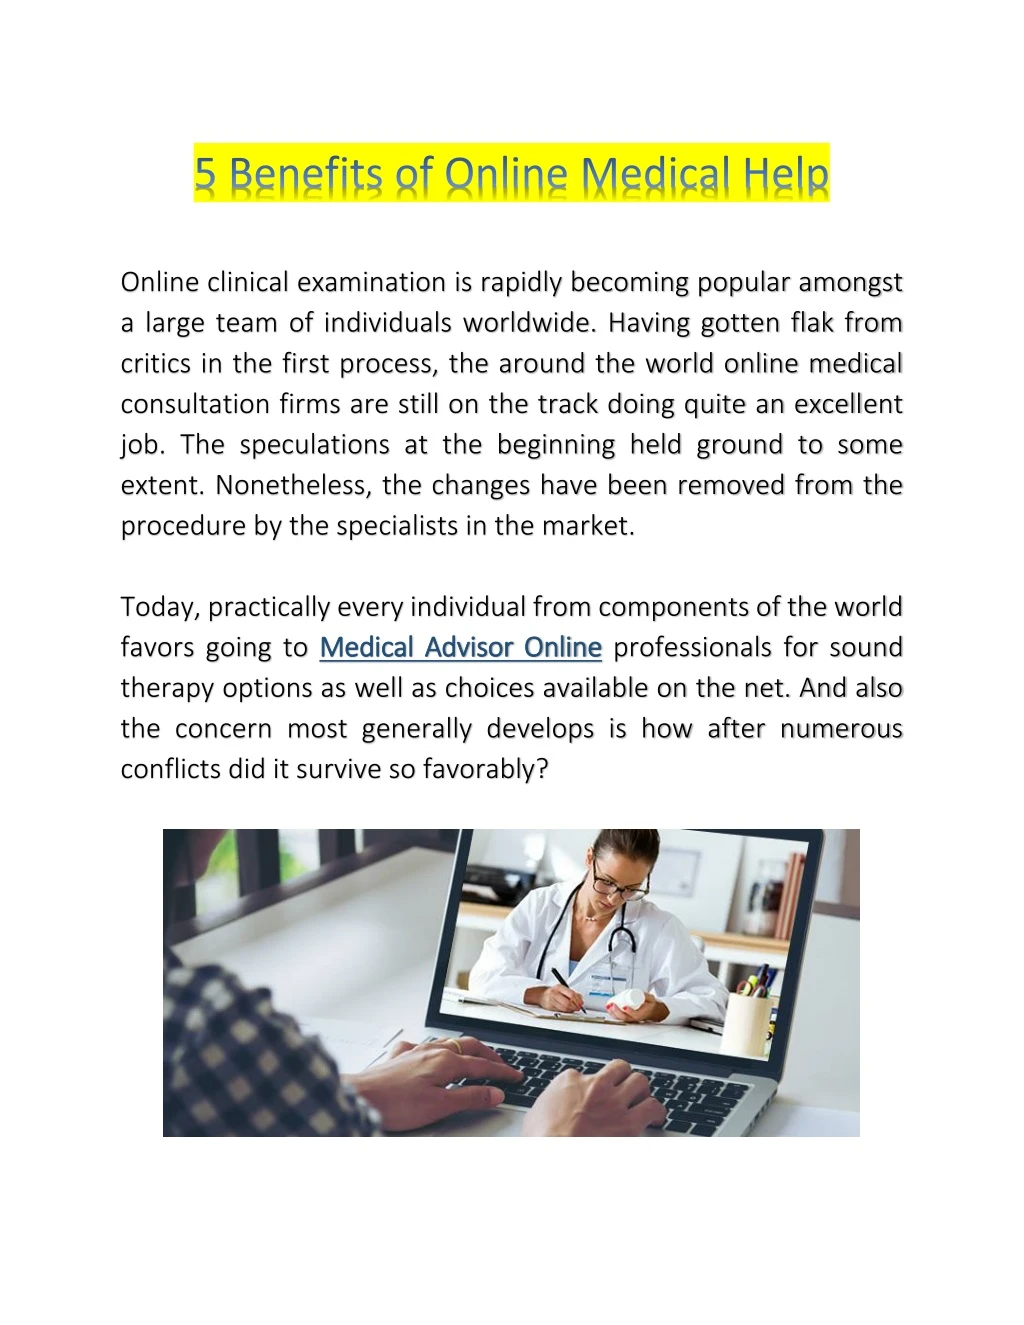 online clinical examination is rapidly becoming